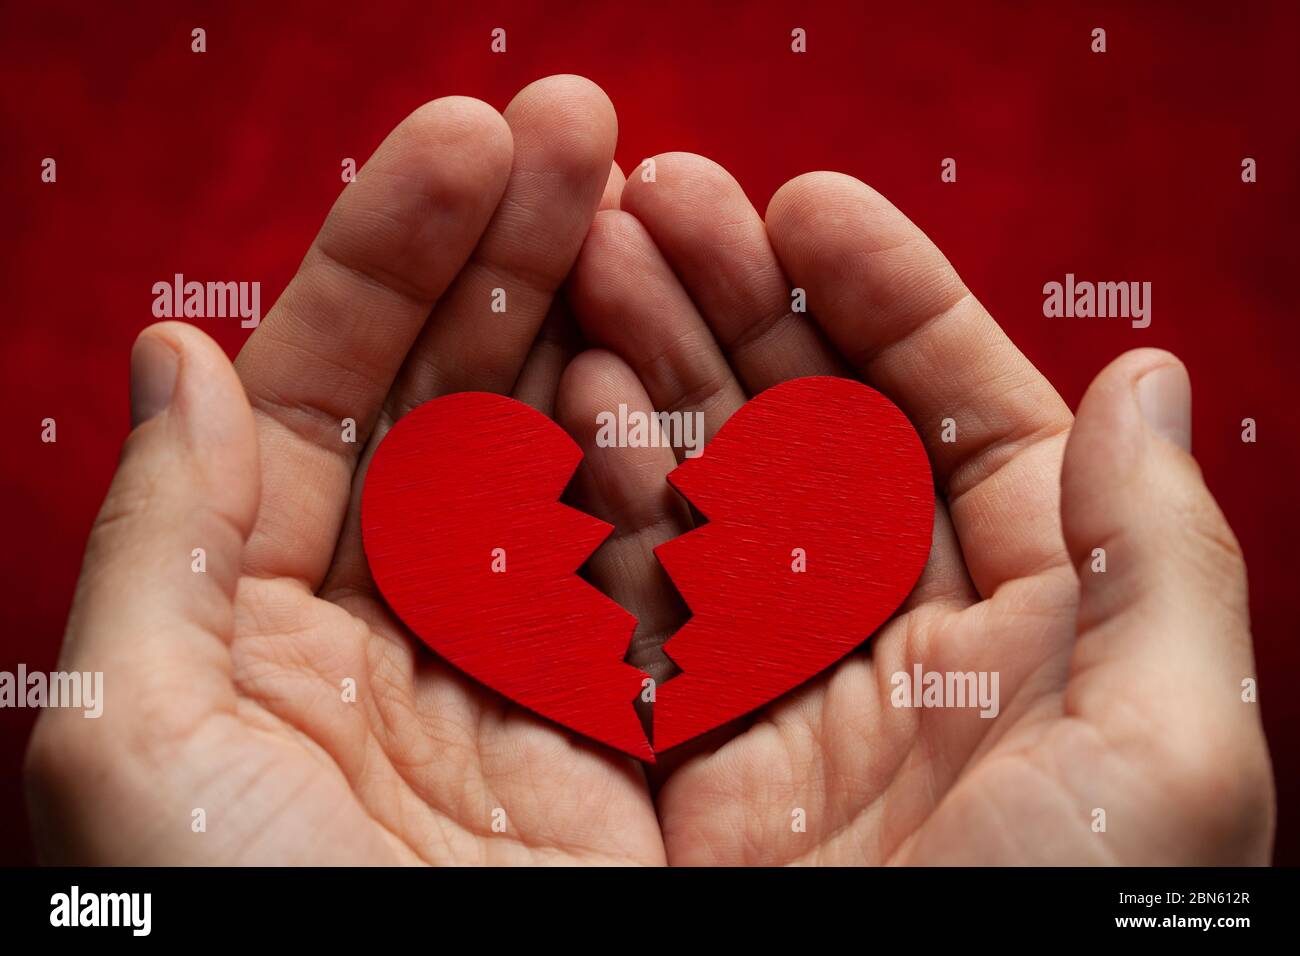 Man holds a broken heart in his hands. Crack in the red heart, Breaking the relationship. Stock Photo